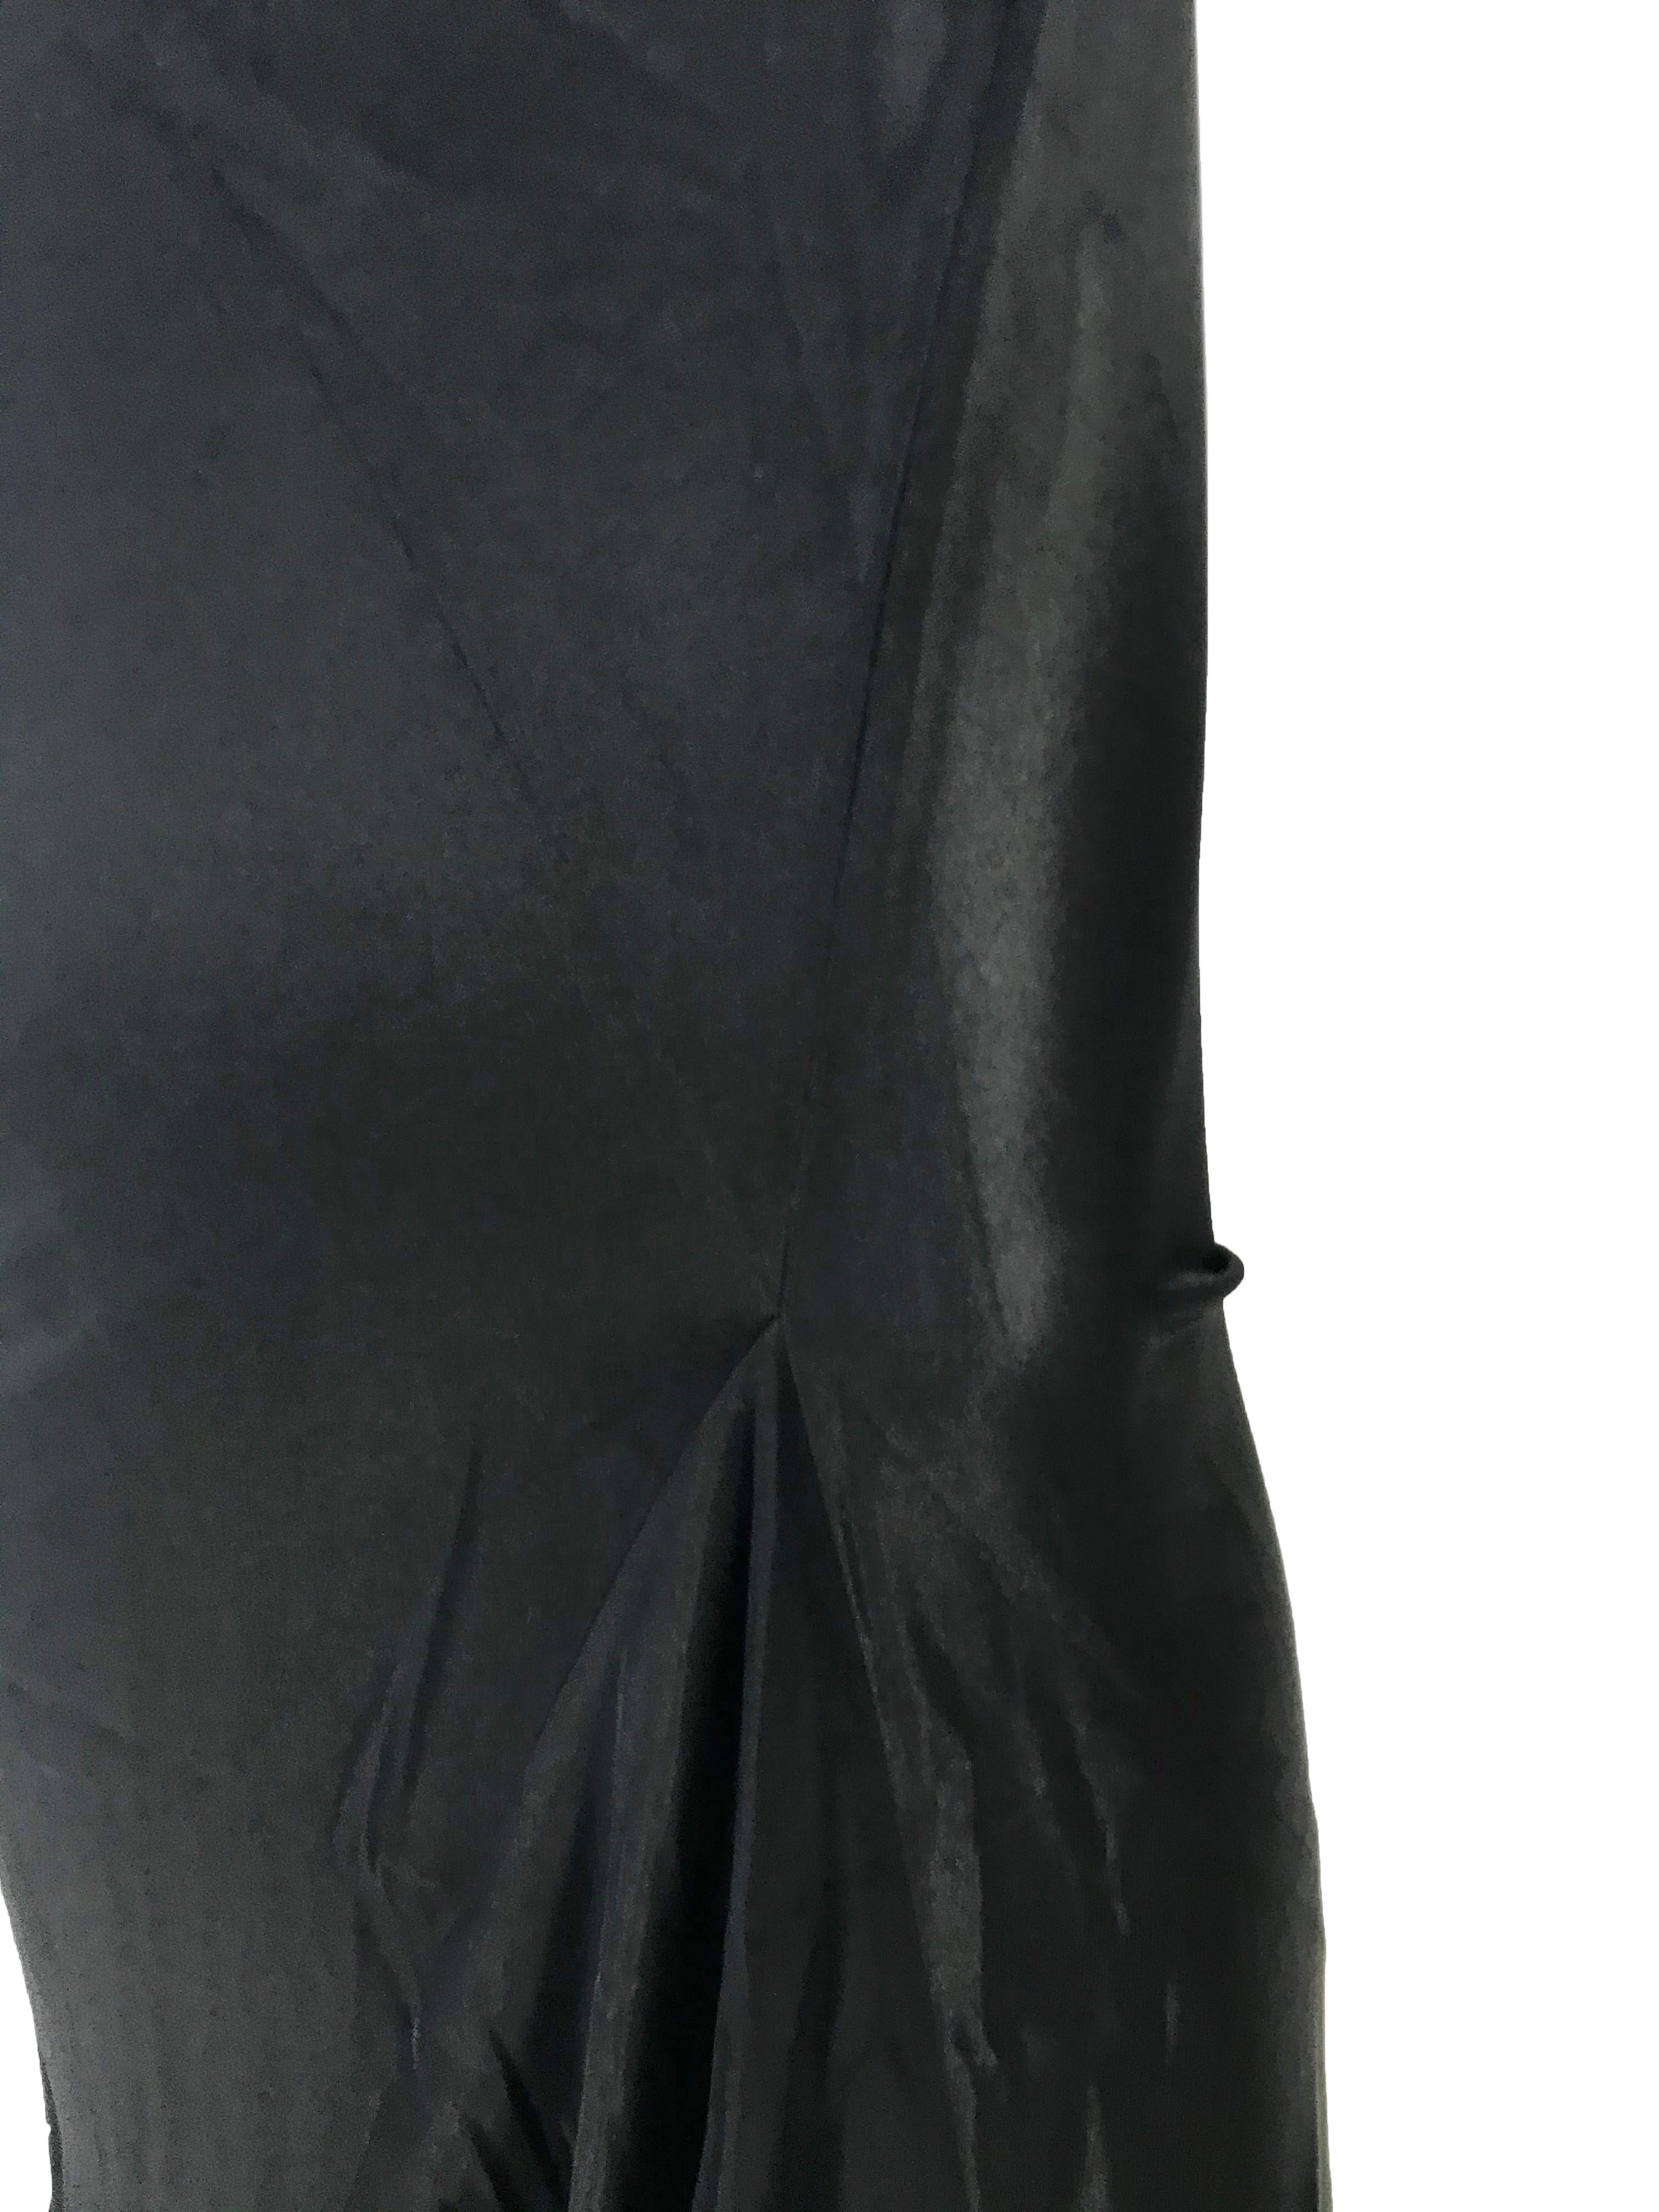 Black 1990s Ann Demeulemeester form fitting gown with kick pleat